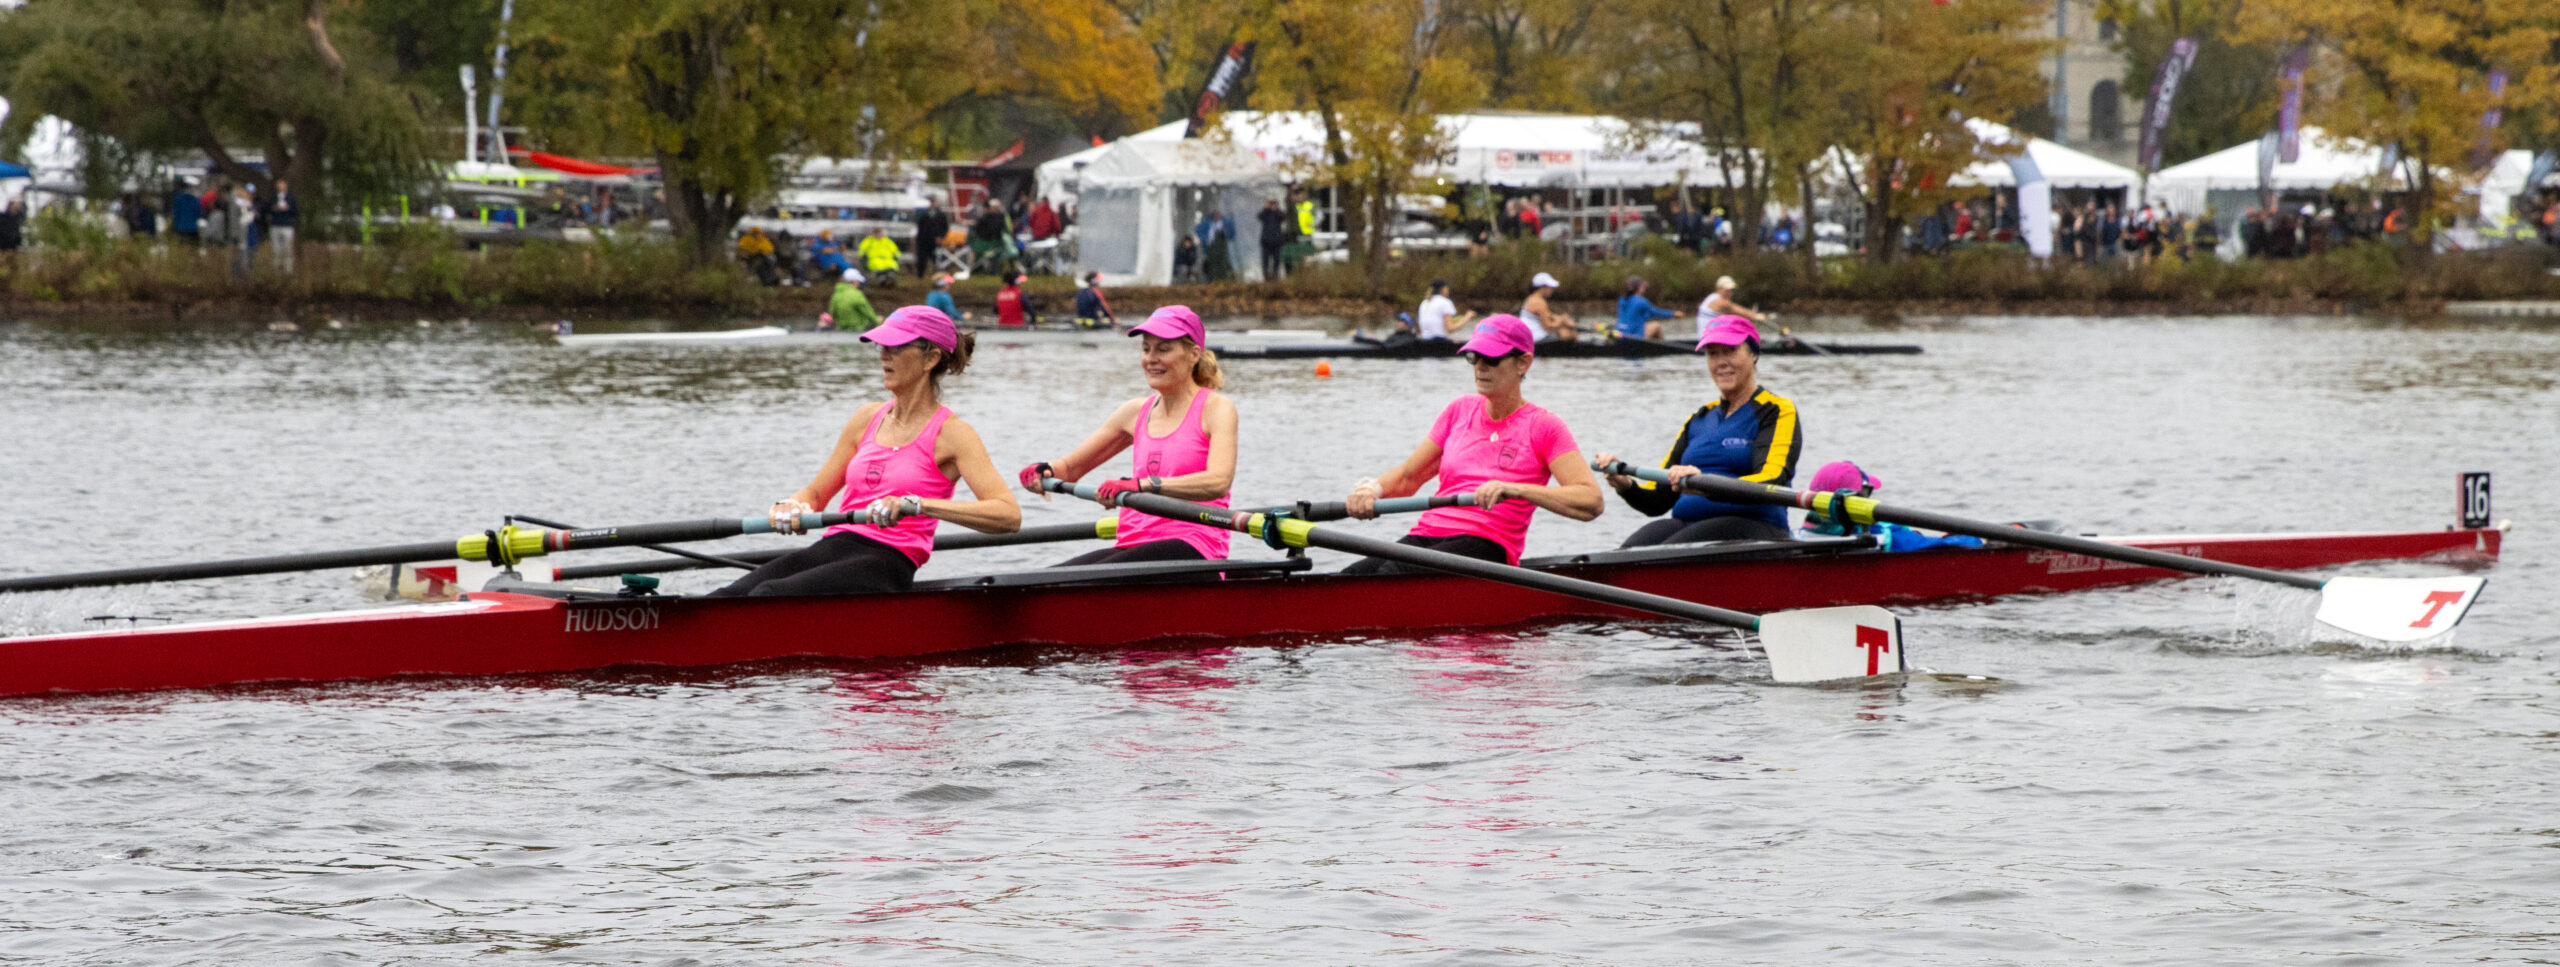 From Treatment to Training: Cancer Survivors Take on the Charles for the First Time